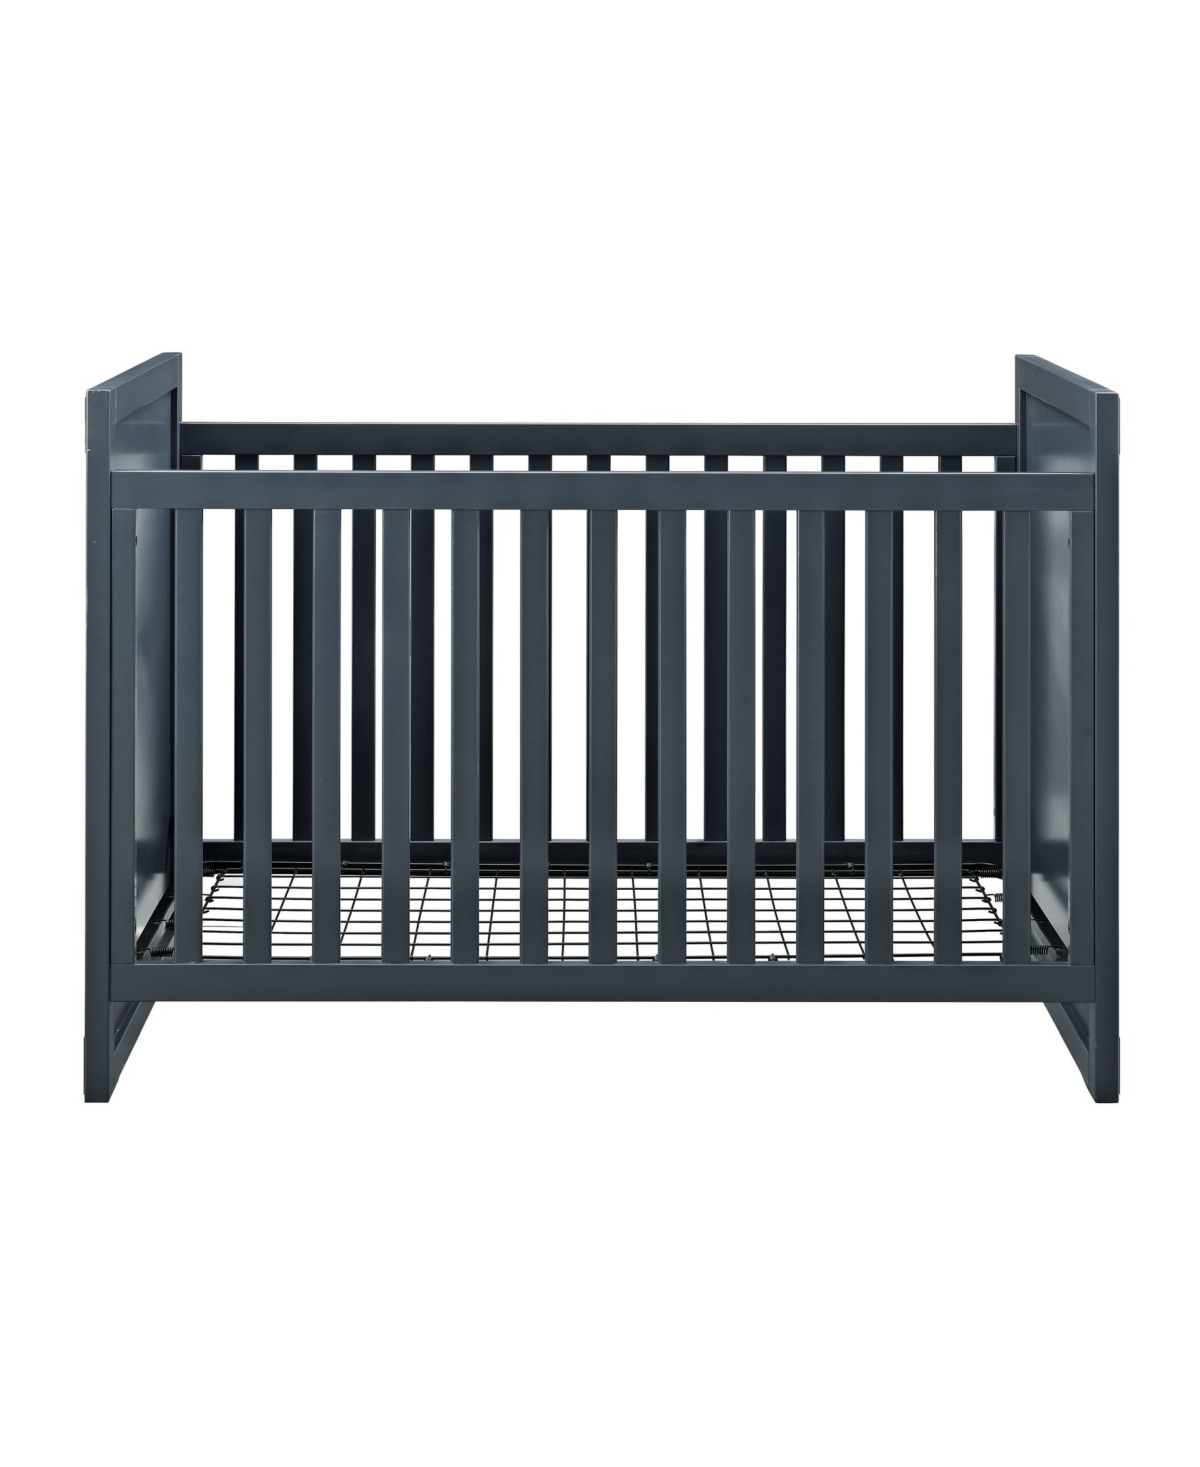 Baby Relax Frances 2-in-1 Convertible Crib